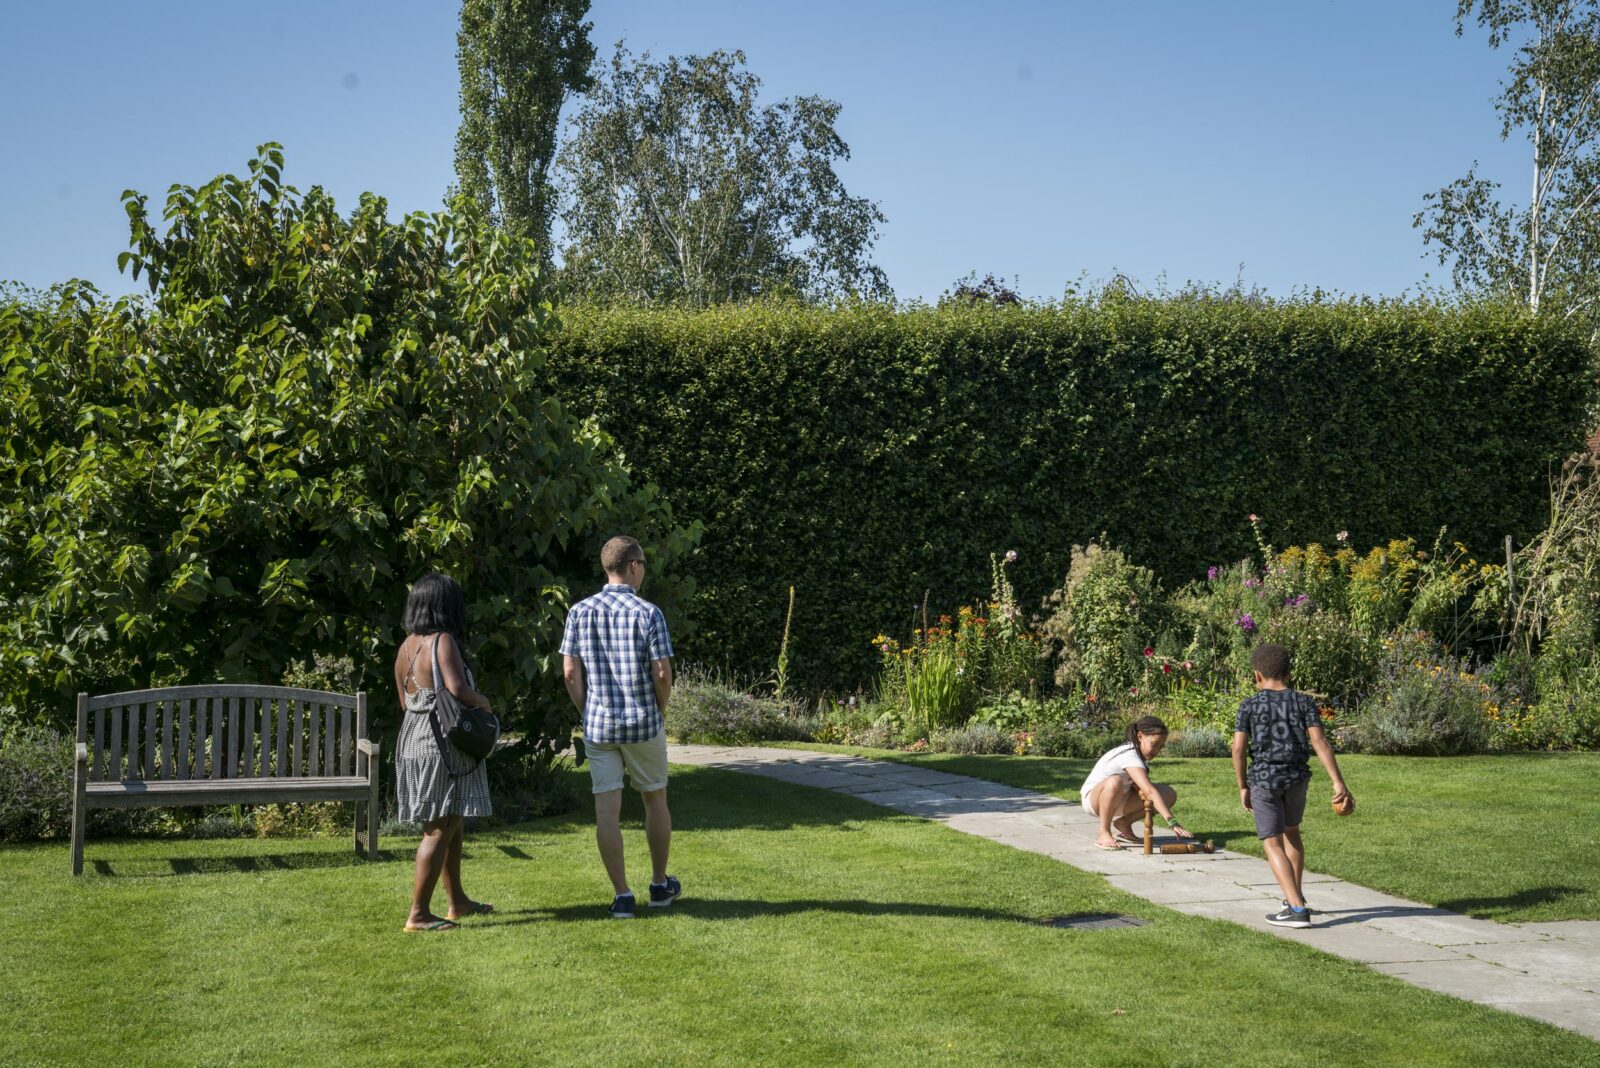 People walking and playing in the garden at Jane Austen's House. Photo by Rob Stothard